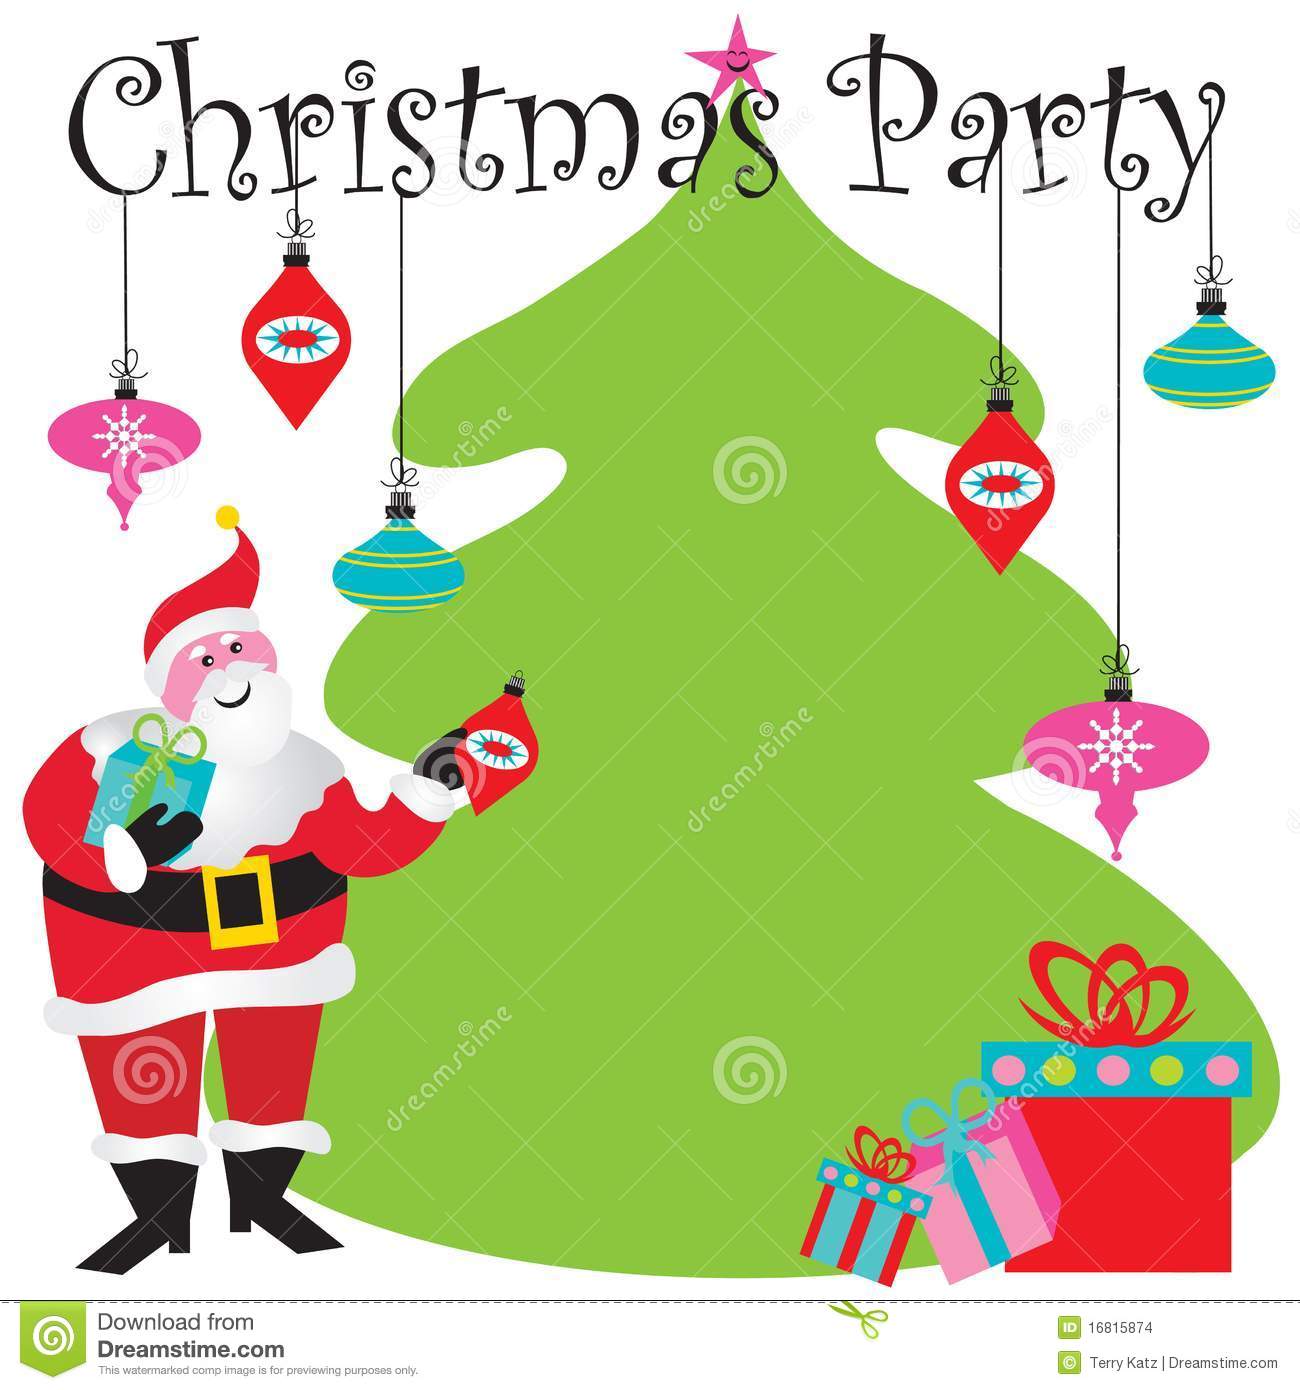 clipart christmas party invitations - photo #37